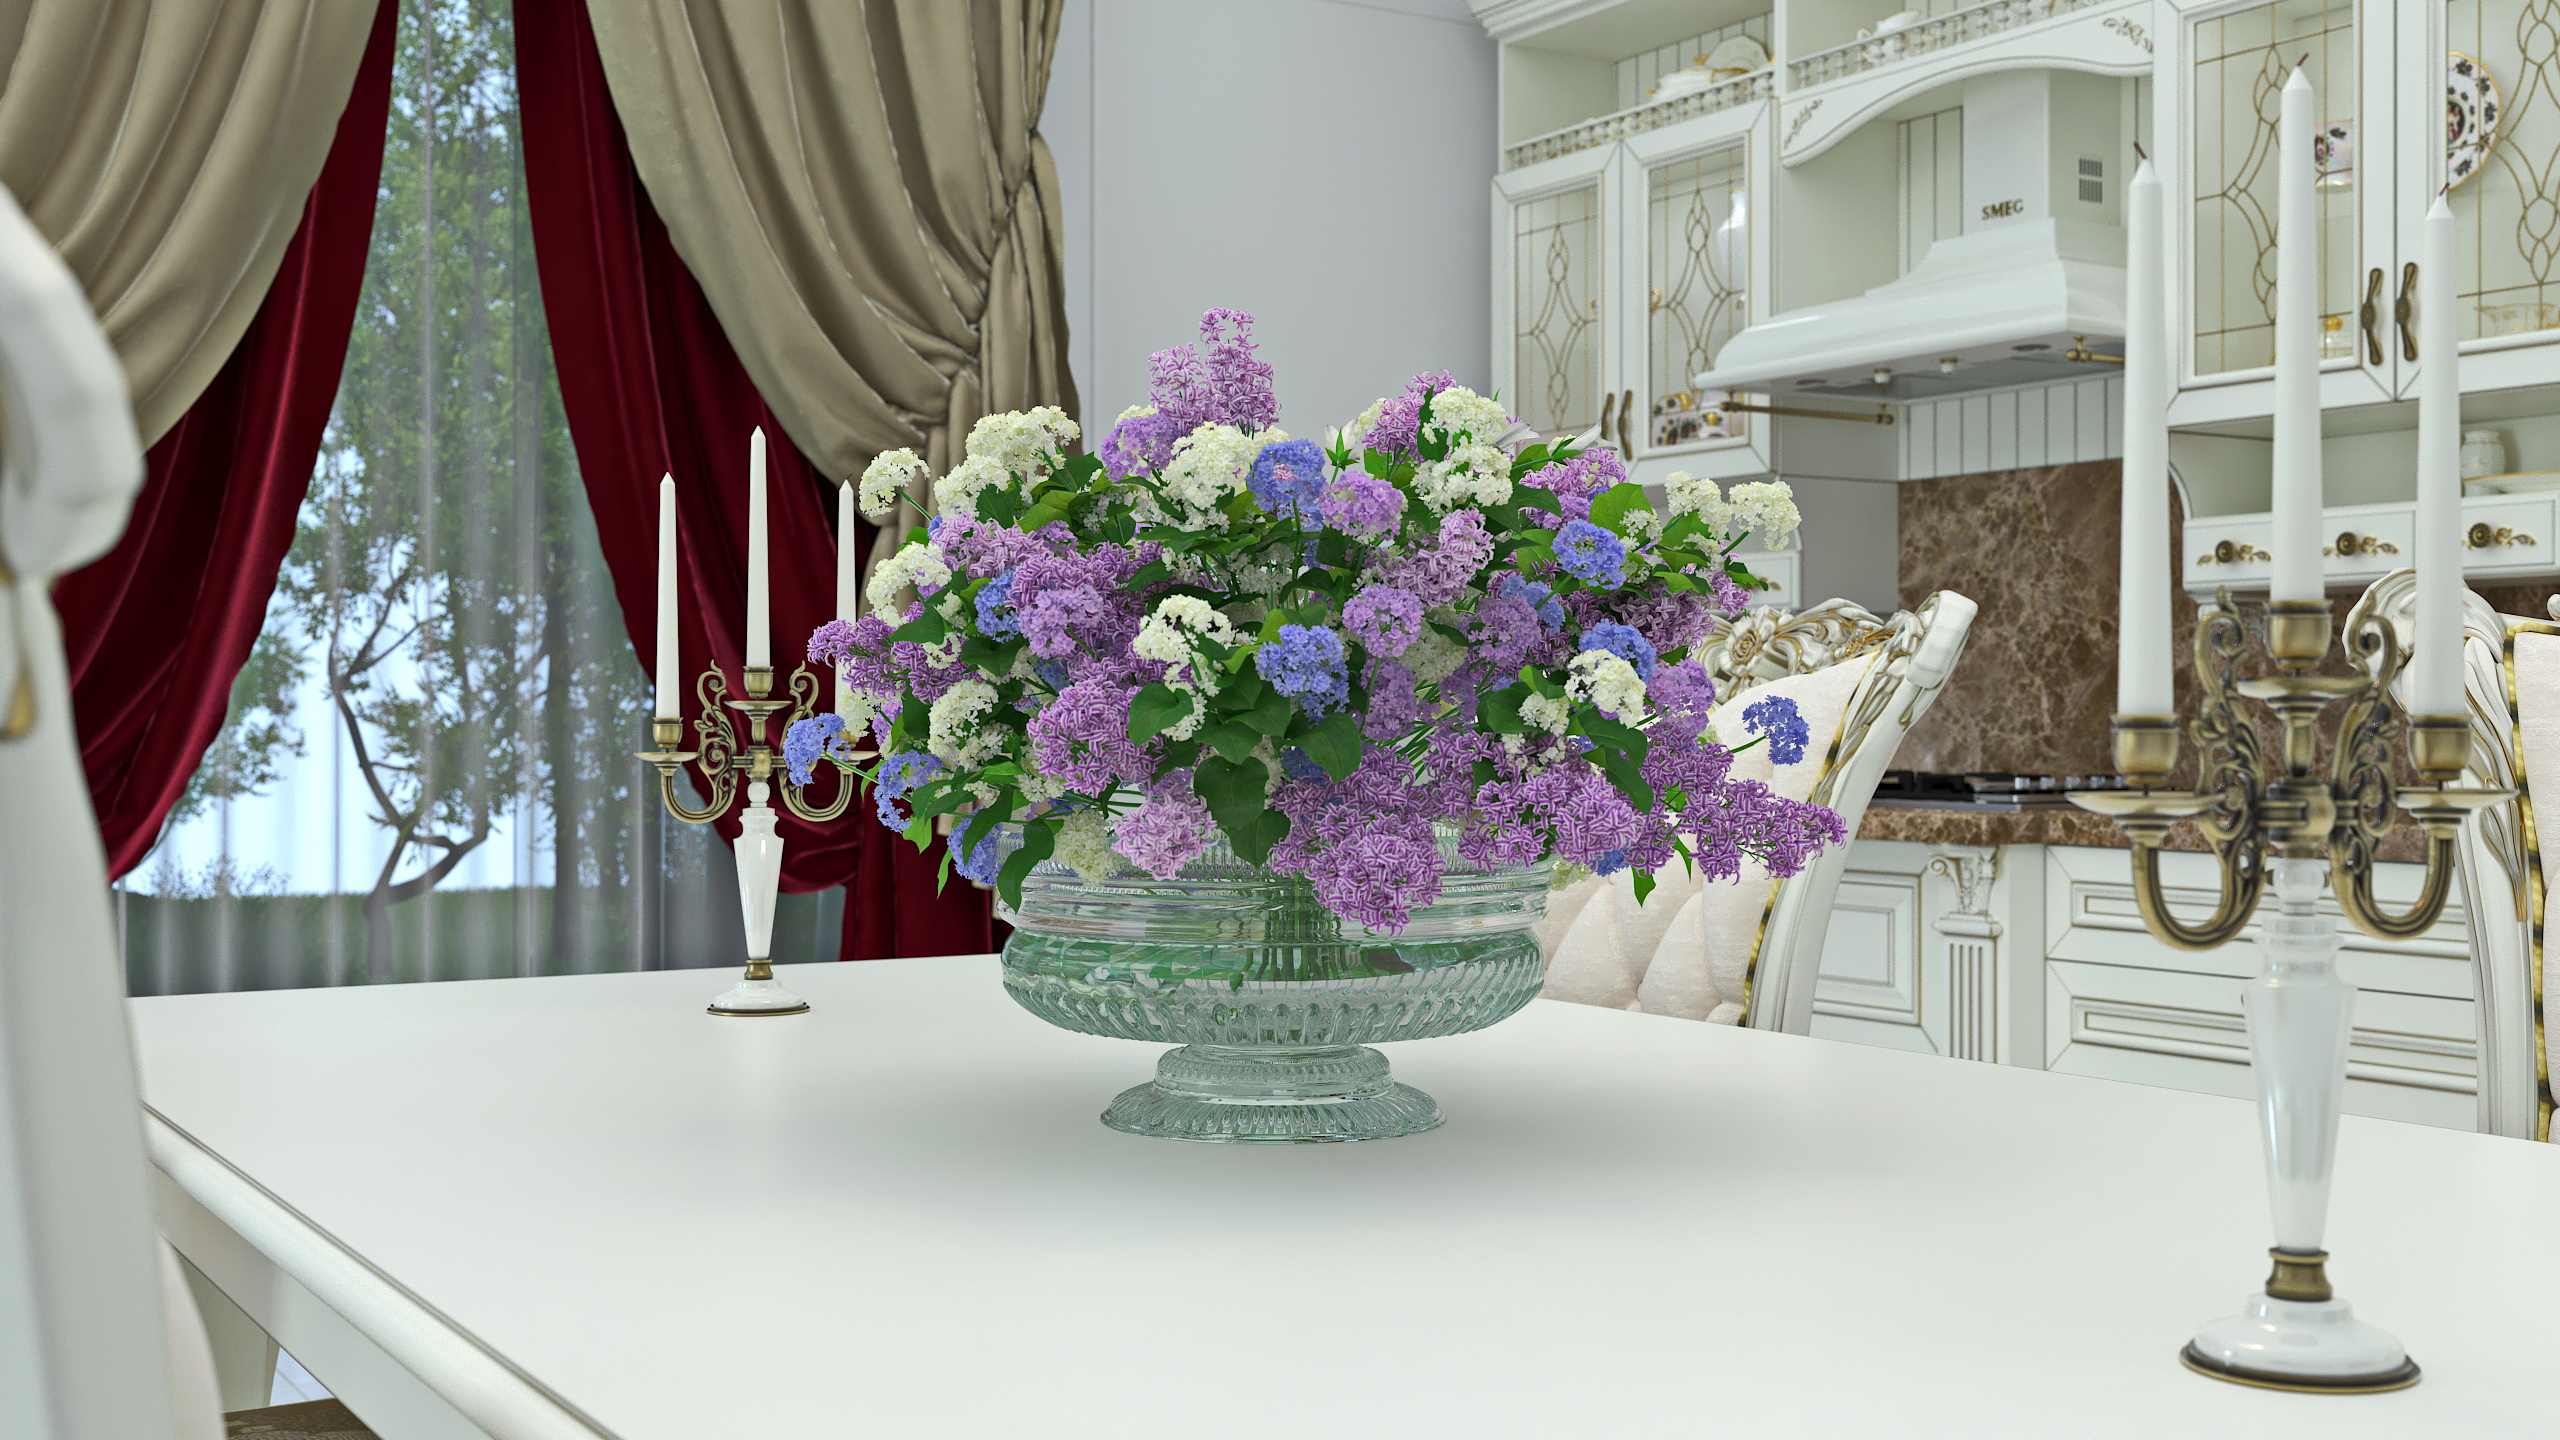 The kitchen in classical style in SolidWorks vray 3.0 image